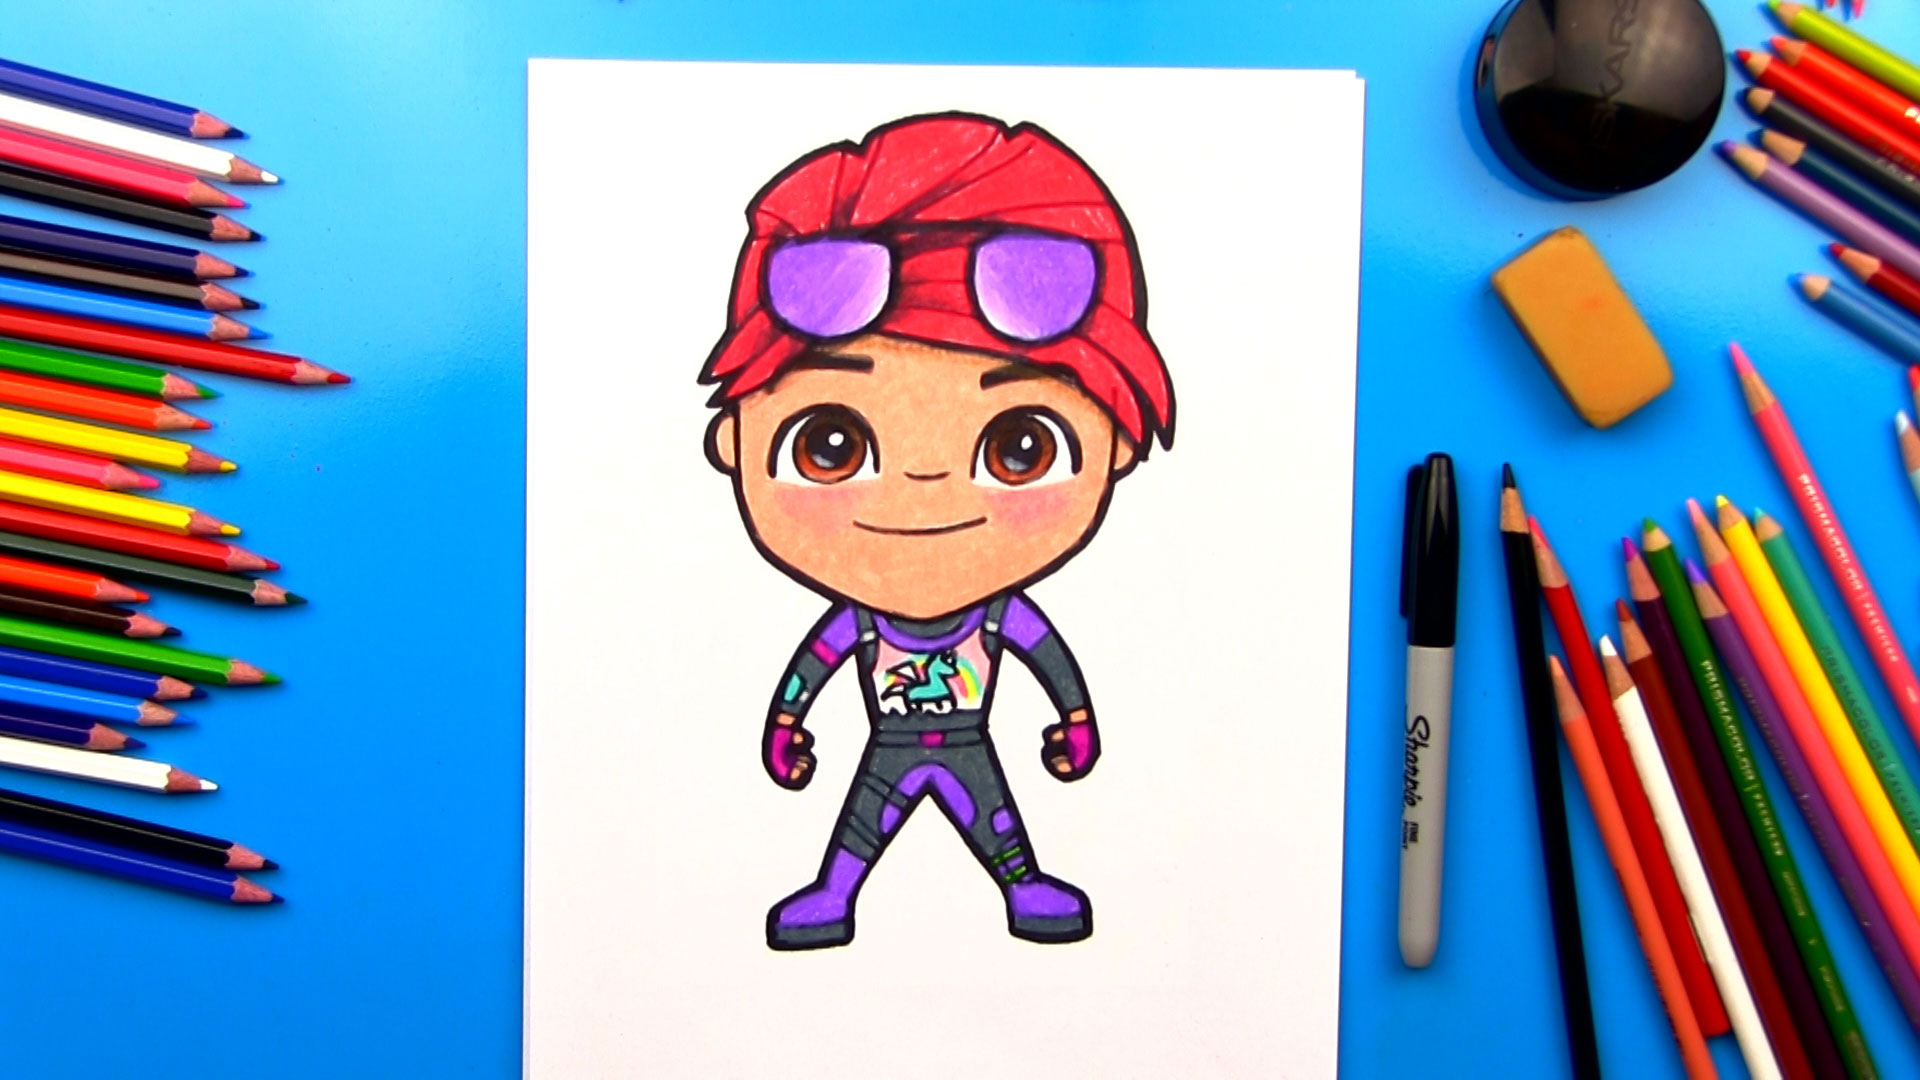 How To Draw Brite Bomber From Fortnite Art For Kids Hub